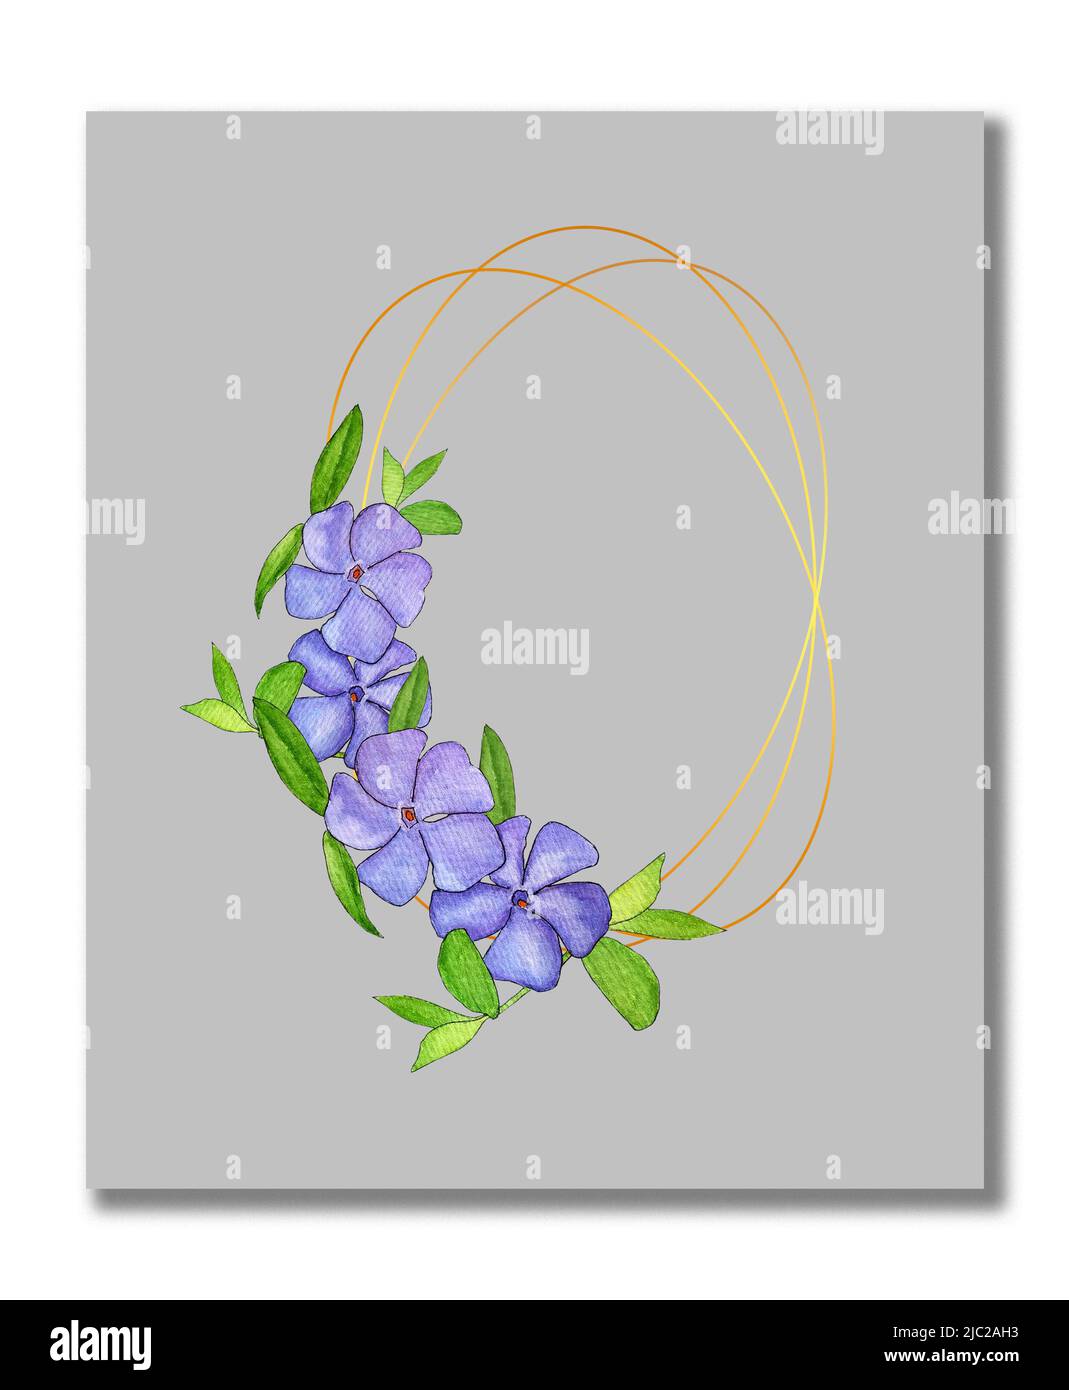 Watercolor, congratulatory spring leaflet with periwinkle flowers. Easter card with periwinkle. Blank template for invitation cards with wild flowers. Stock Photo